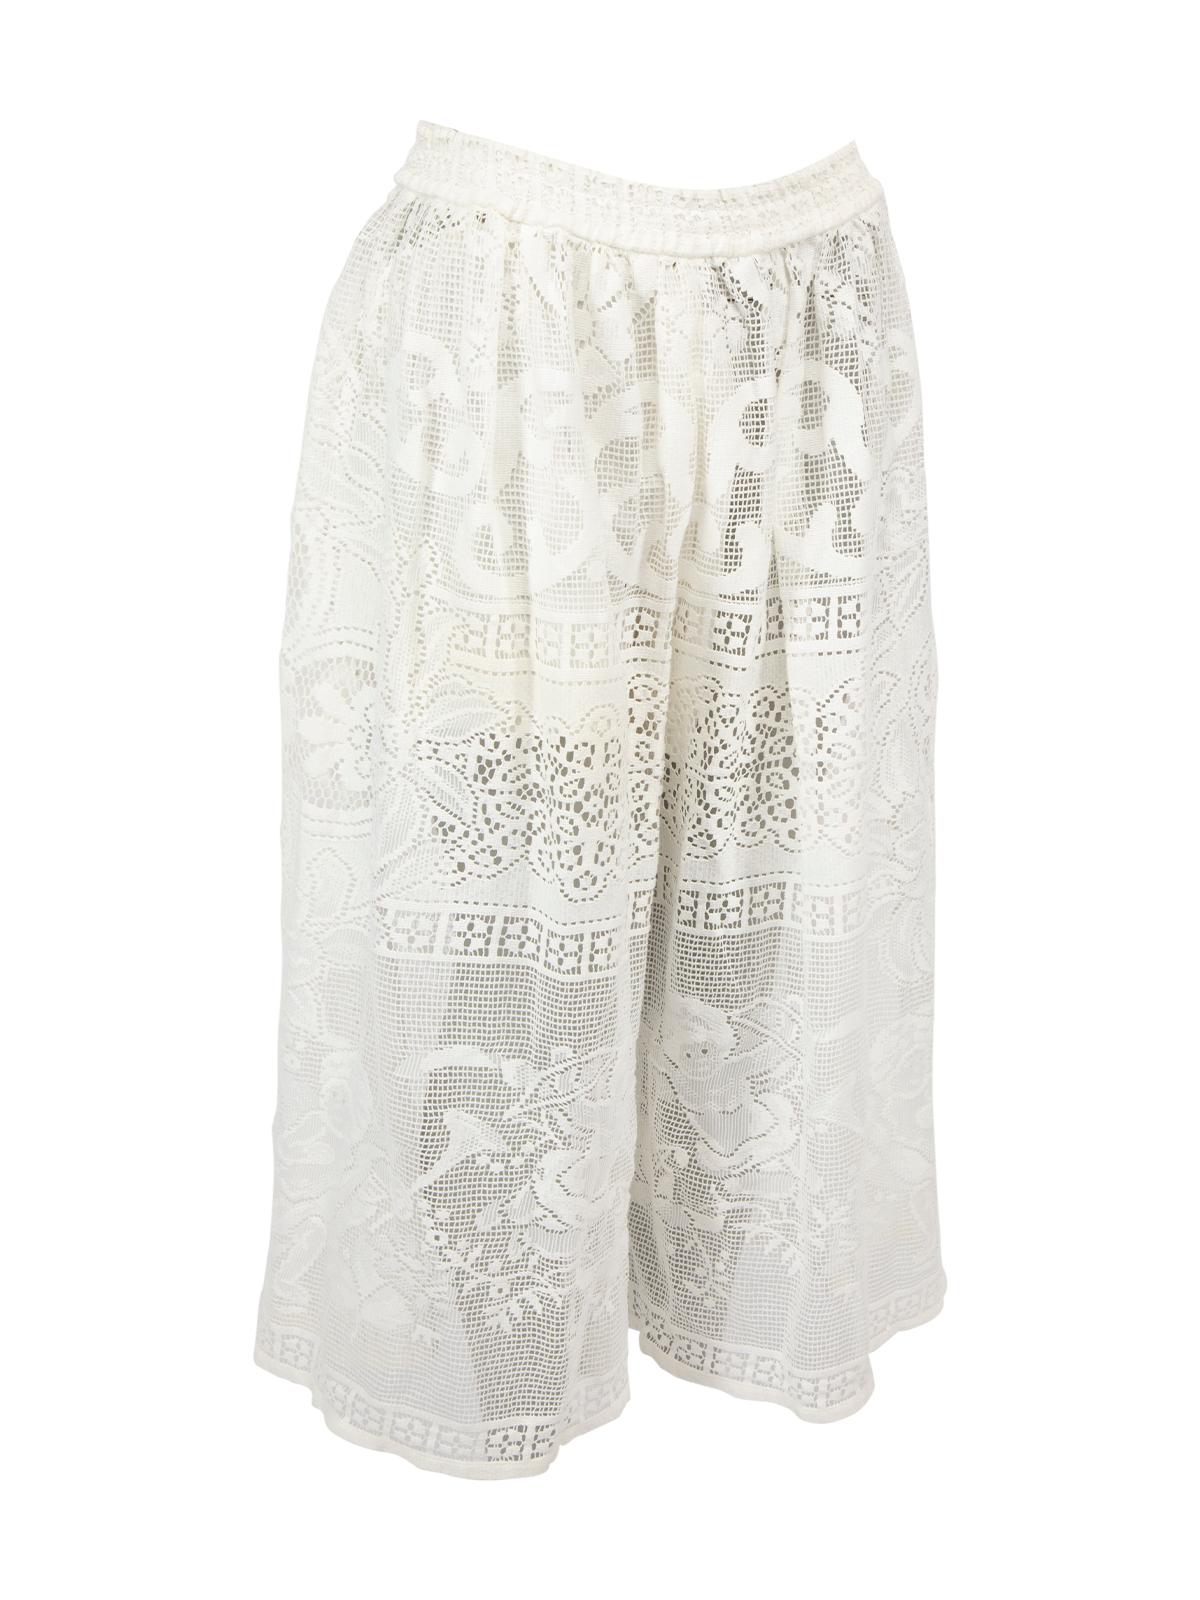 CONDITION is Never worn, with tags. No visible wear to culottes is evident on this new Dolce & Gabbana designer resale item. Details White Crochet Wide leg Made in ITALY Composition 90% COTTON, 10% POLYAMIDE Care instructions: Professional dry clean